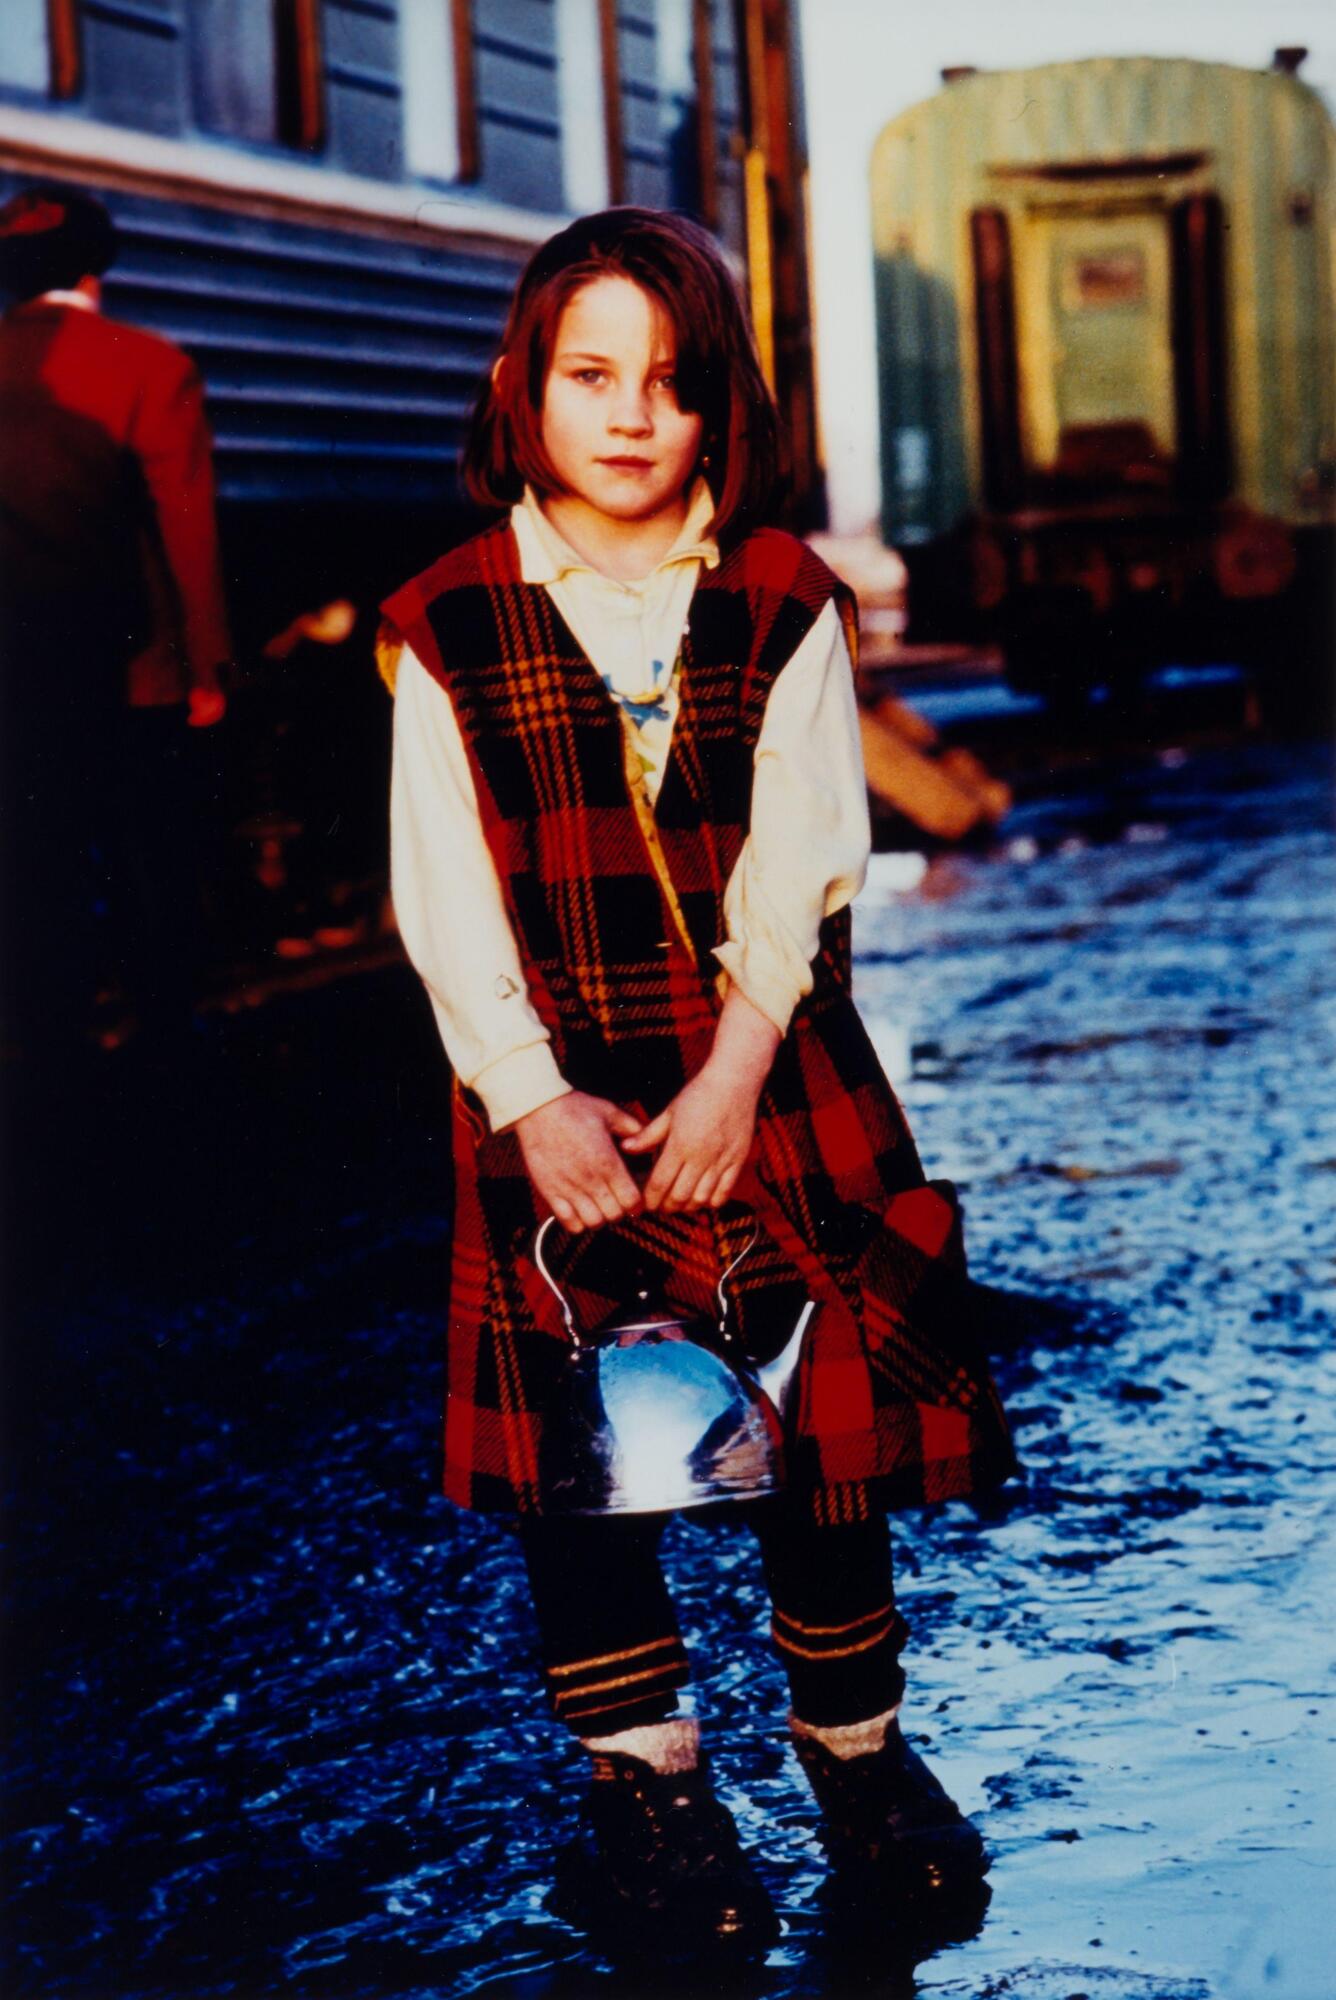 A girl on the street in a red plaid uniform holding a silver teapot.